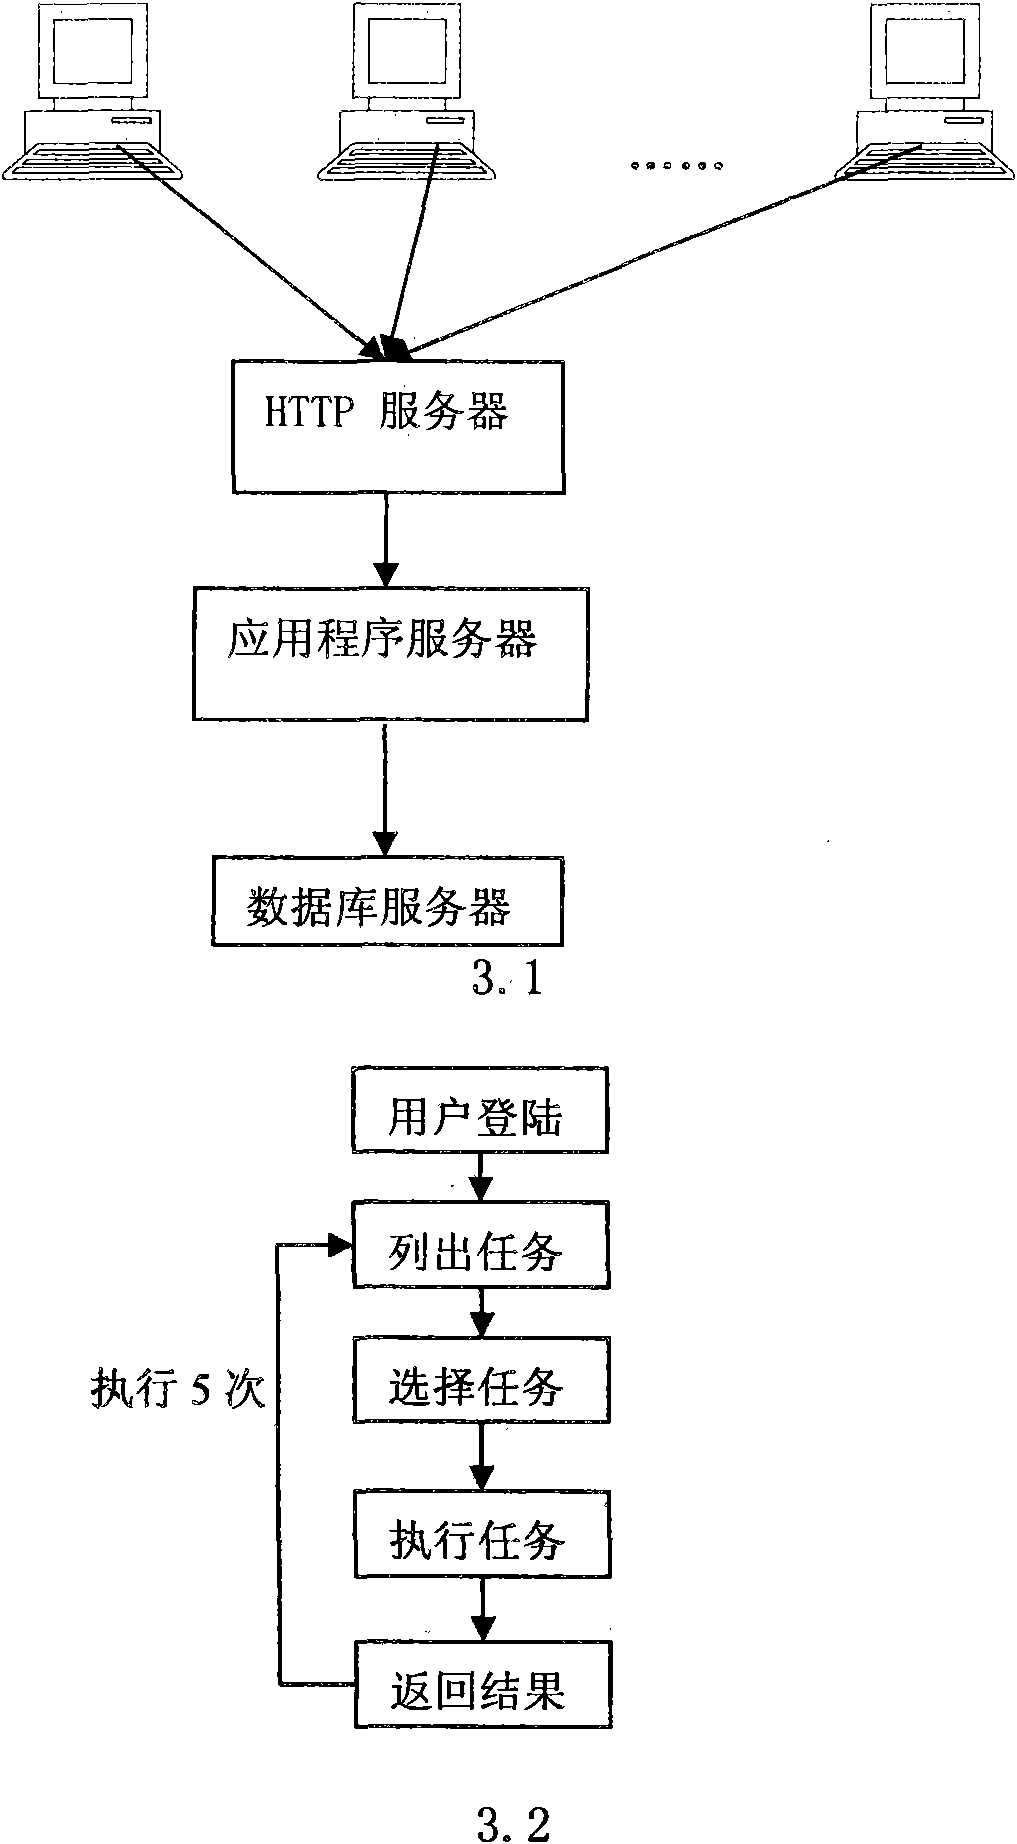 Method for improving performance tuning speed of distributed system